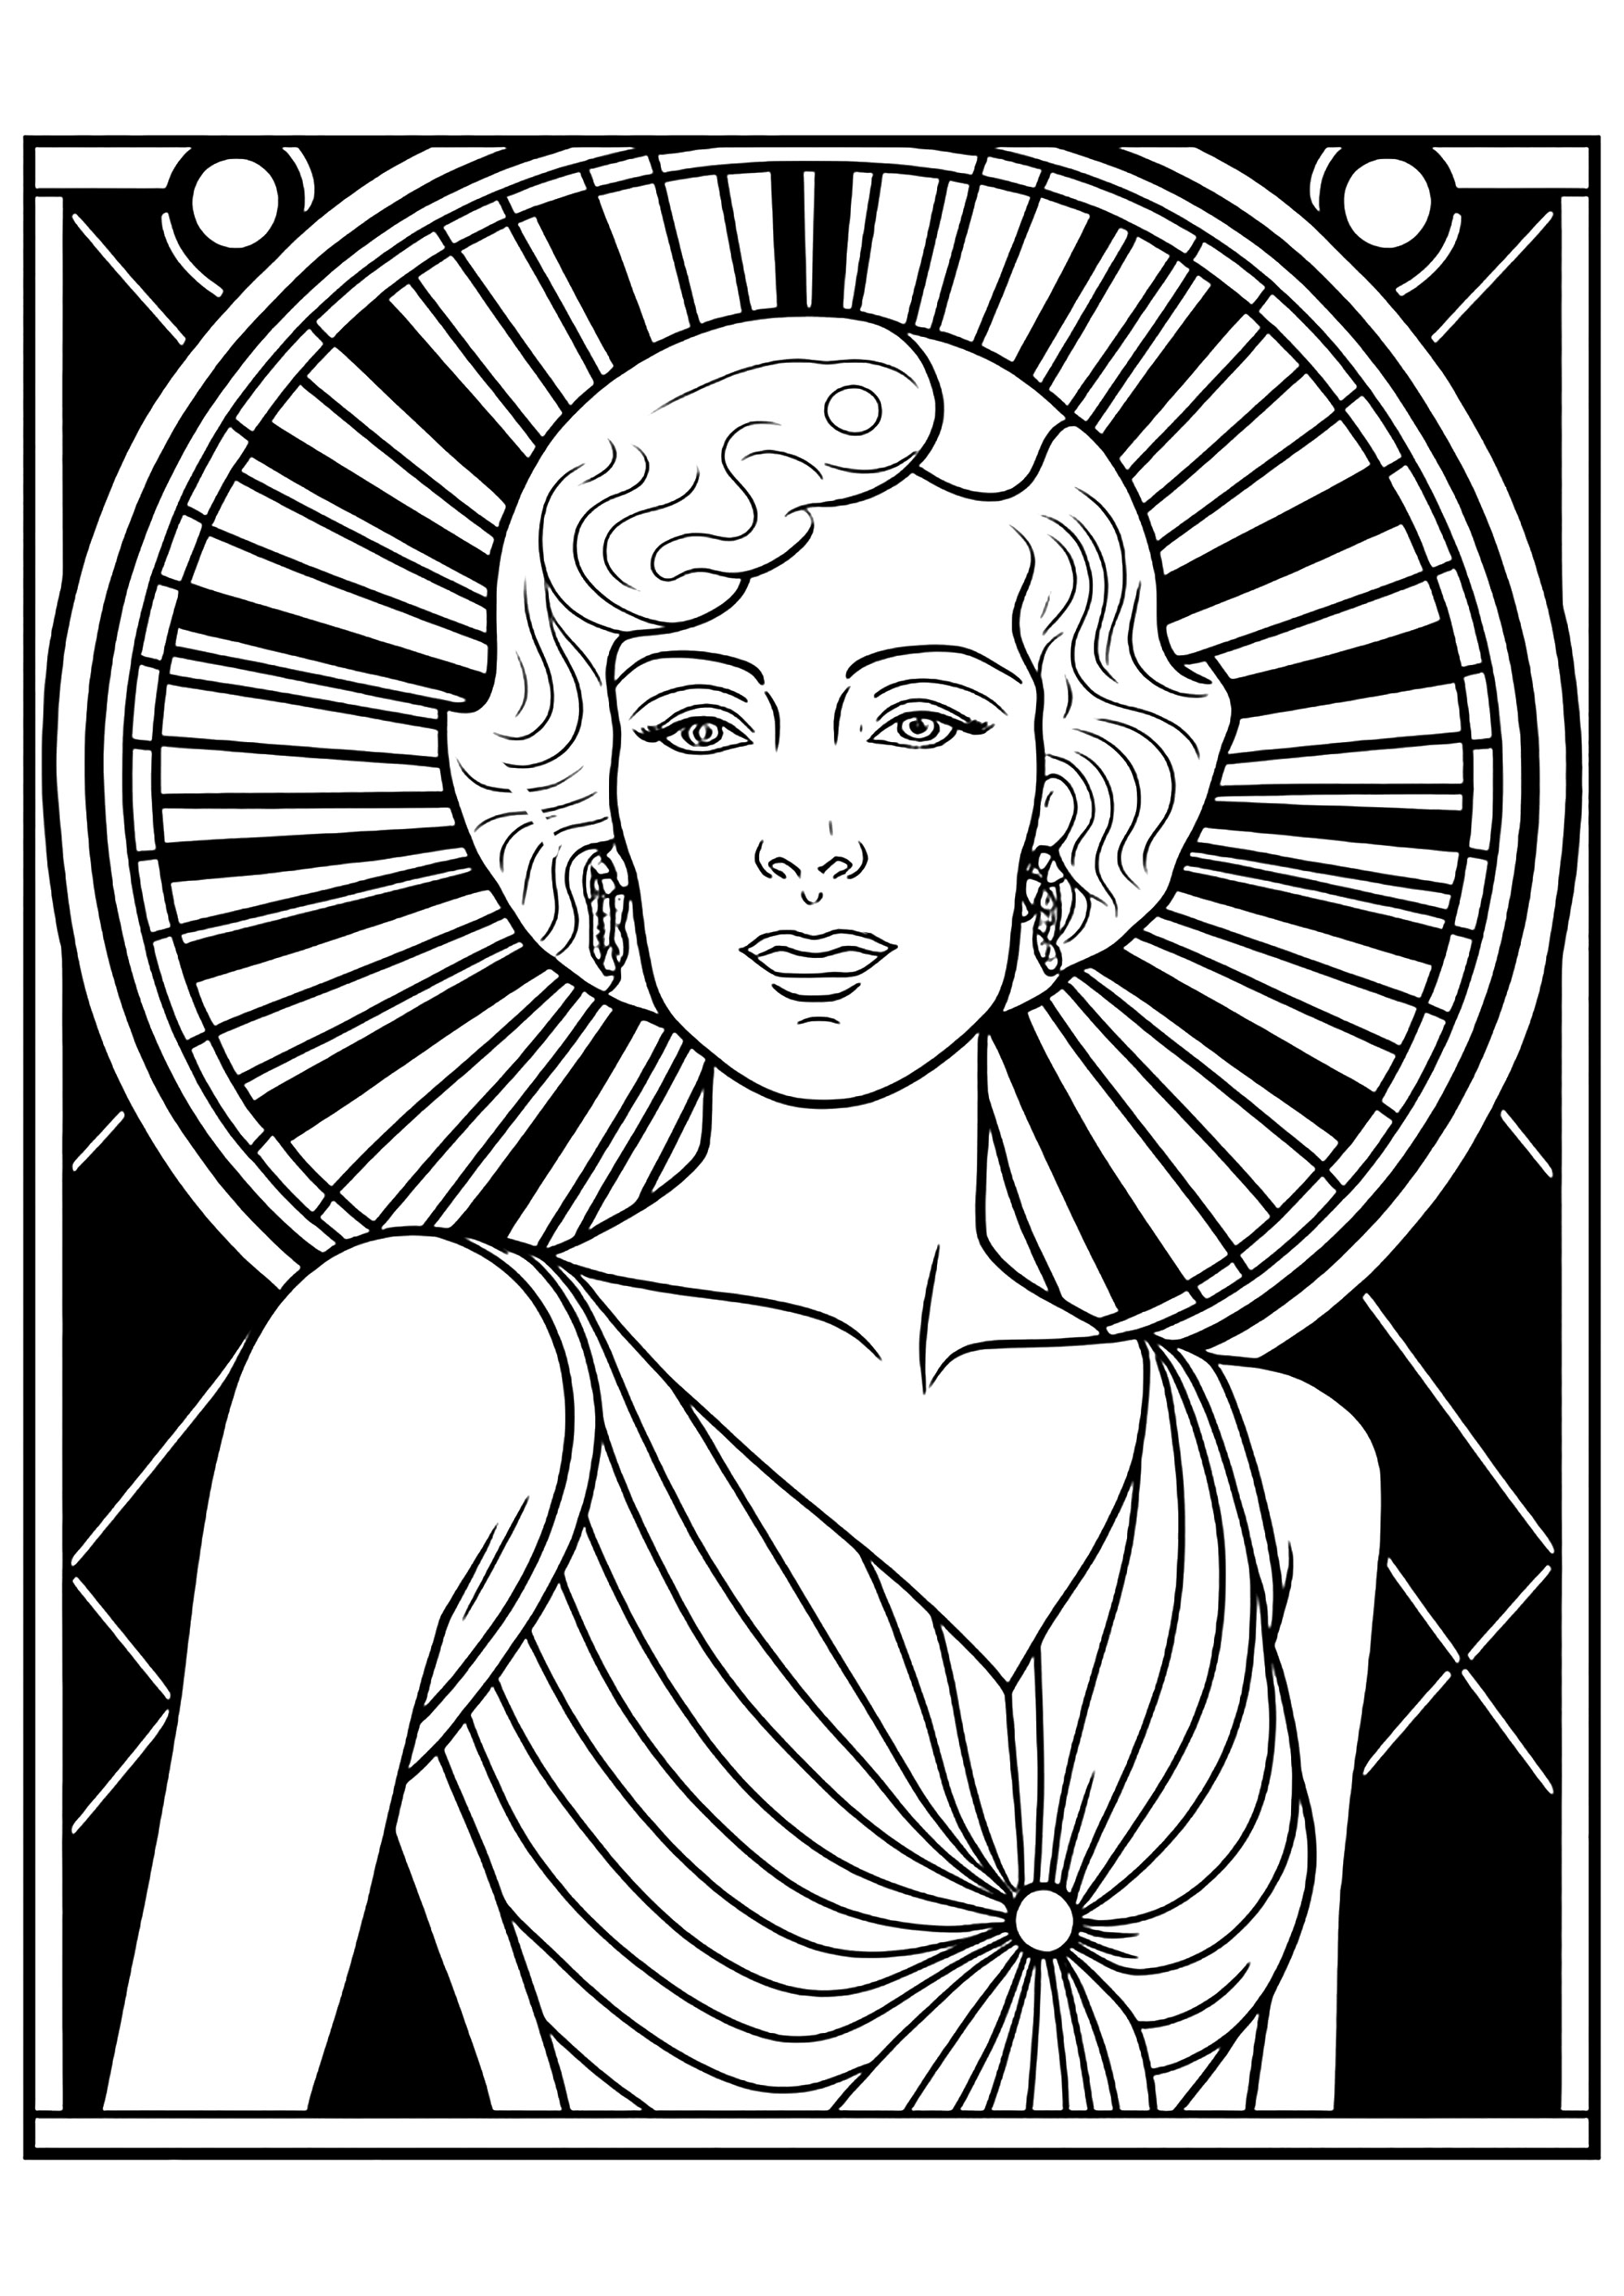 Elegant woman of the 20's, with Art Deco background. She looks like she's straight out of a period movie